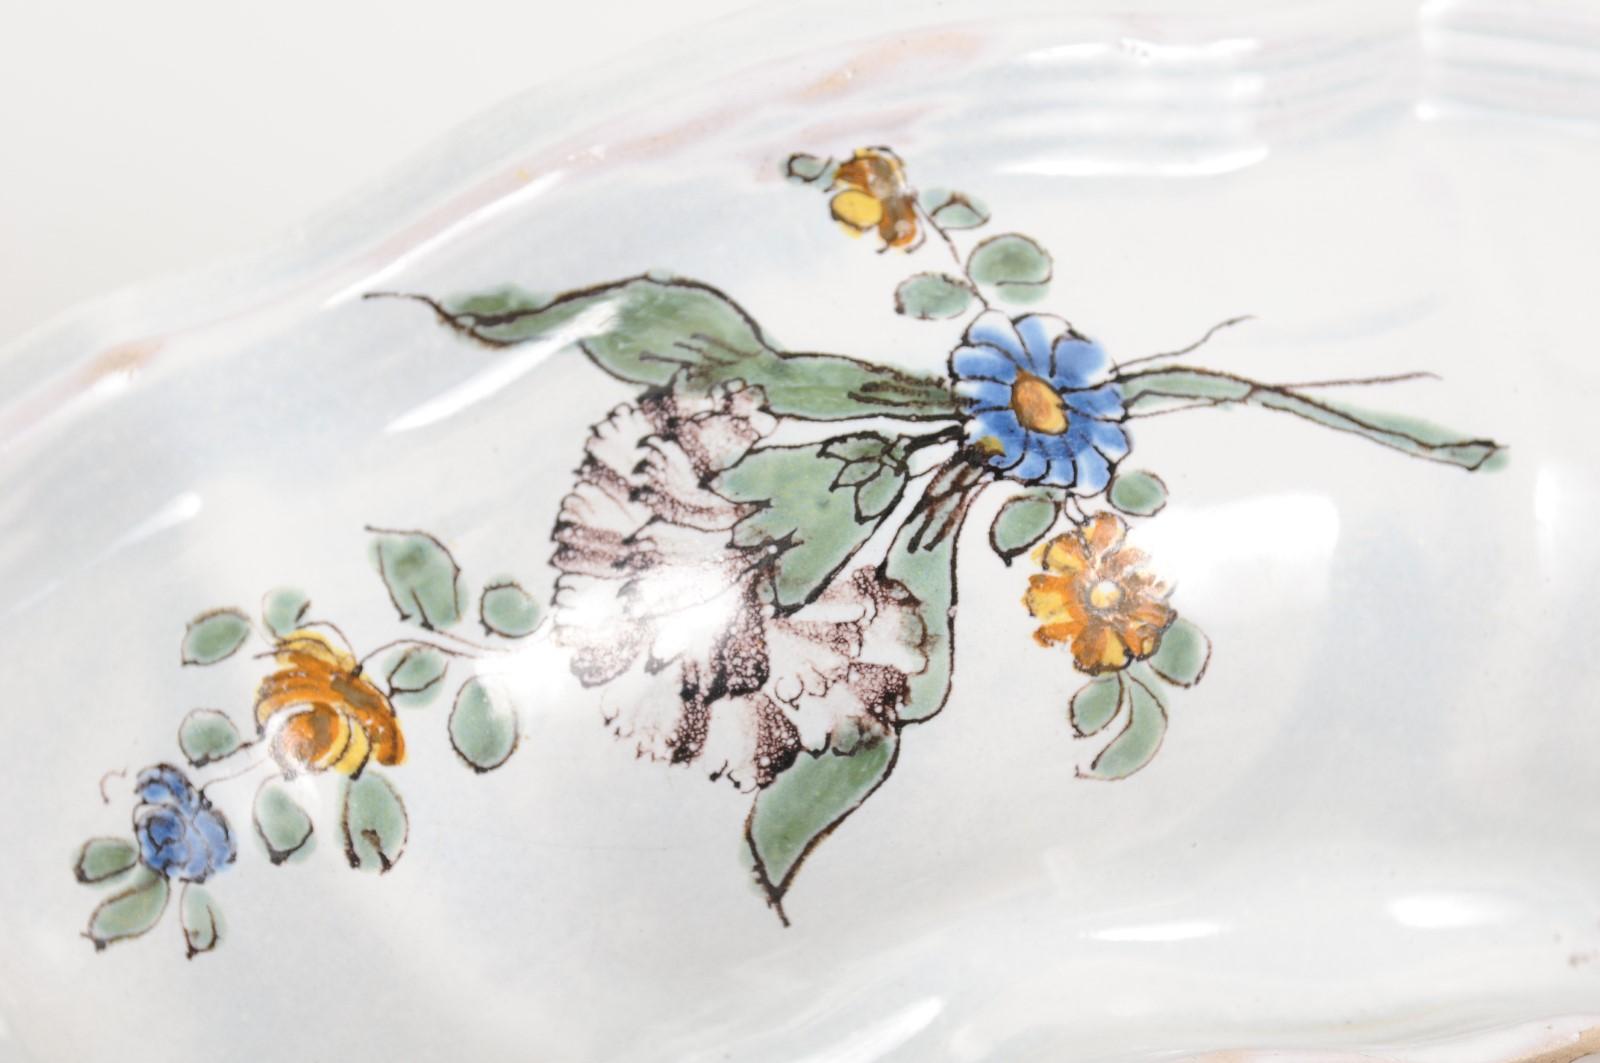 French 1750s Faience Oval Shaped Soup Tureen from Bordeaux with Floral Decor For Sale 8